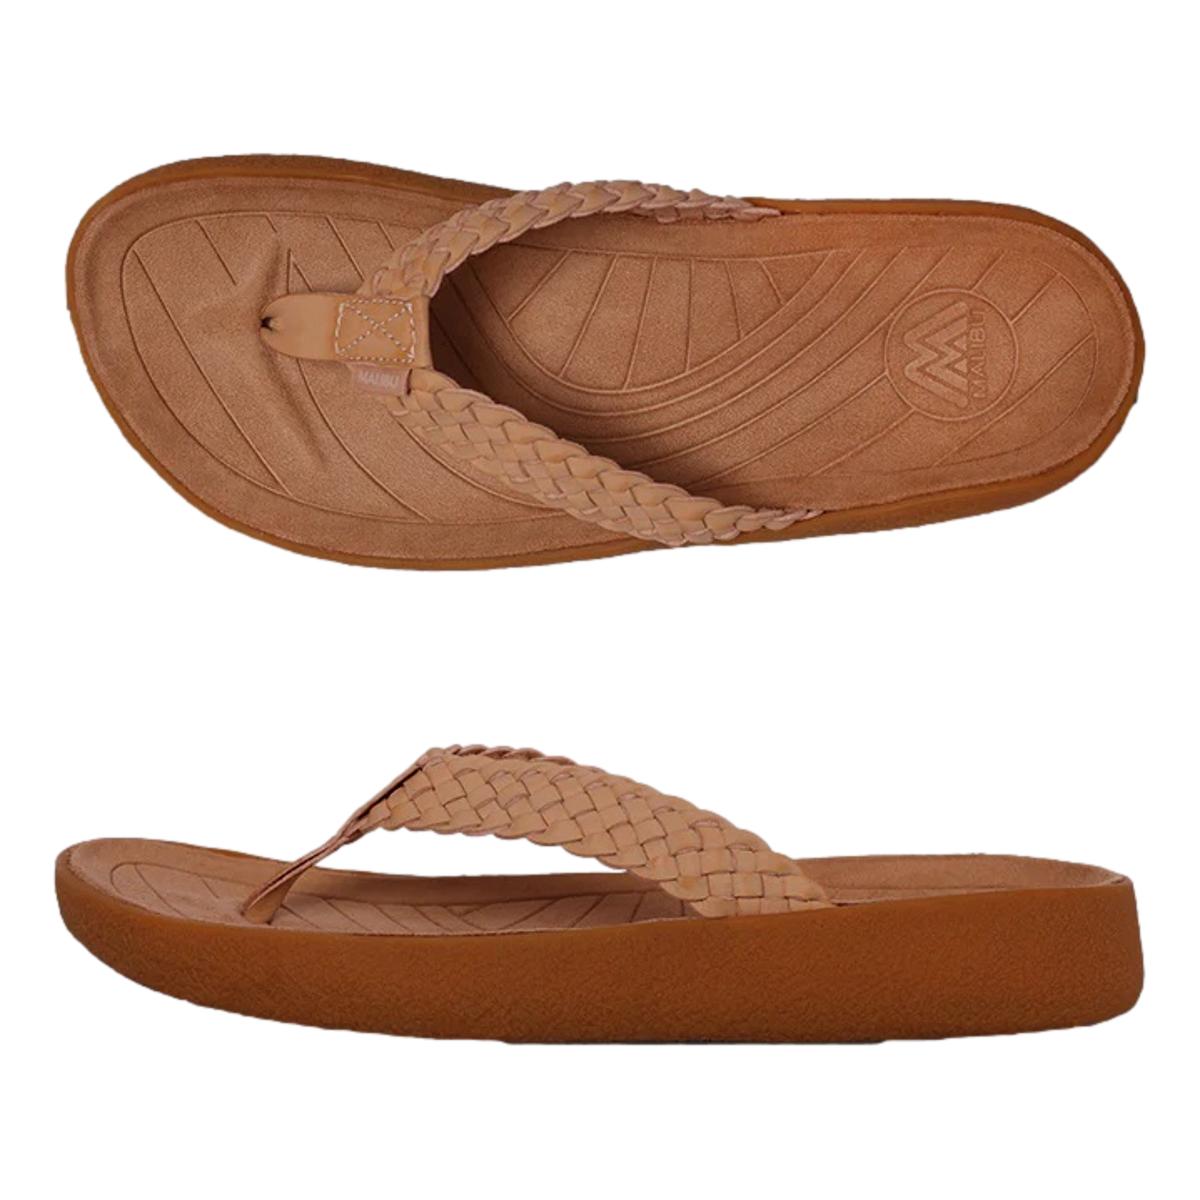 Surfrider Woven Vegan Leather Rubber Tan - Shoes